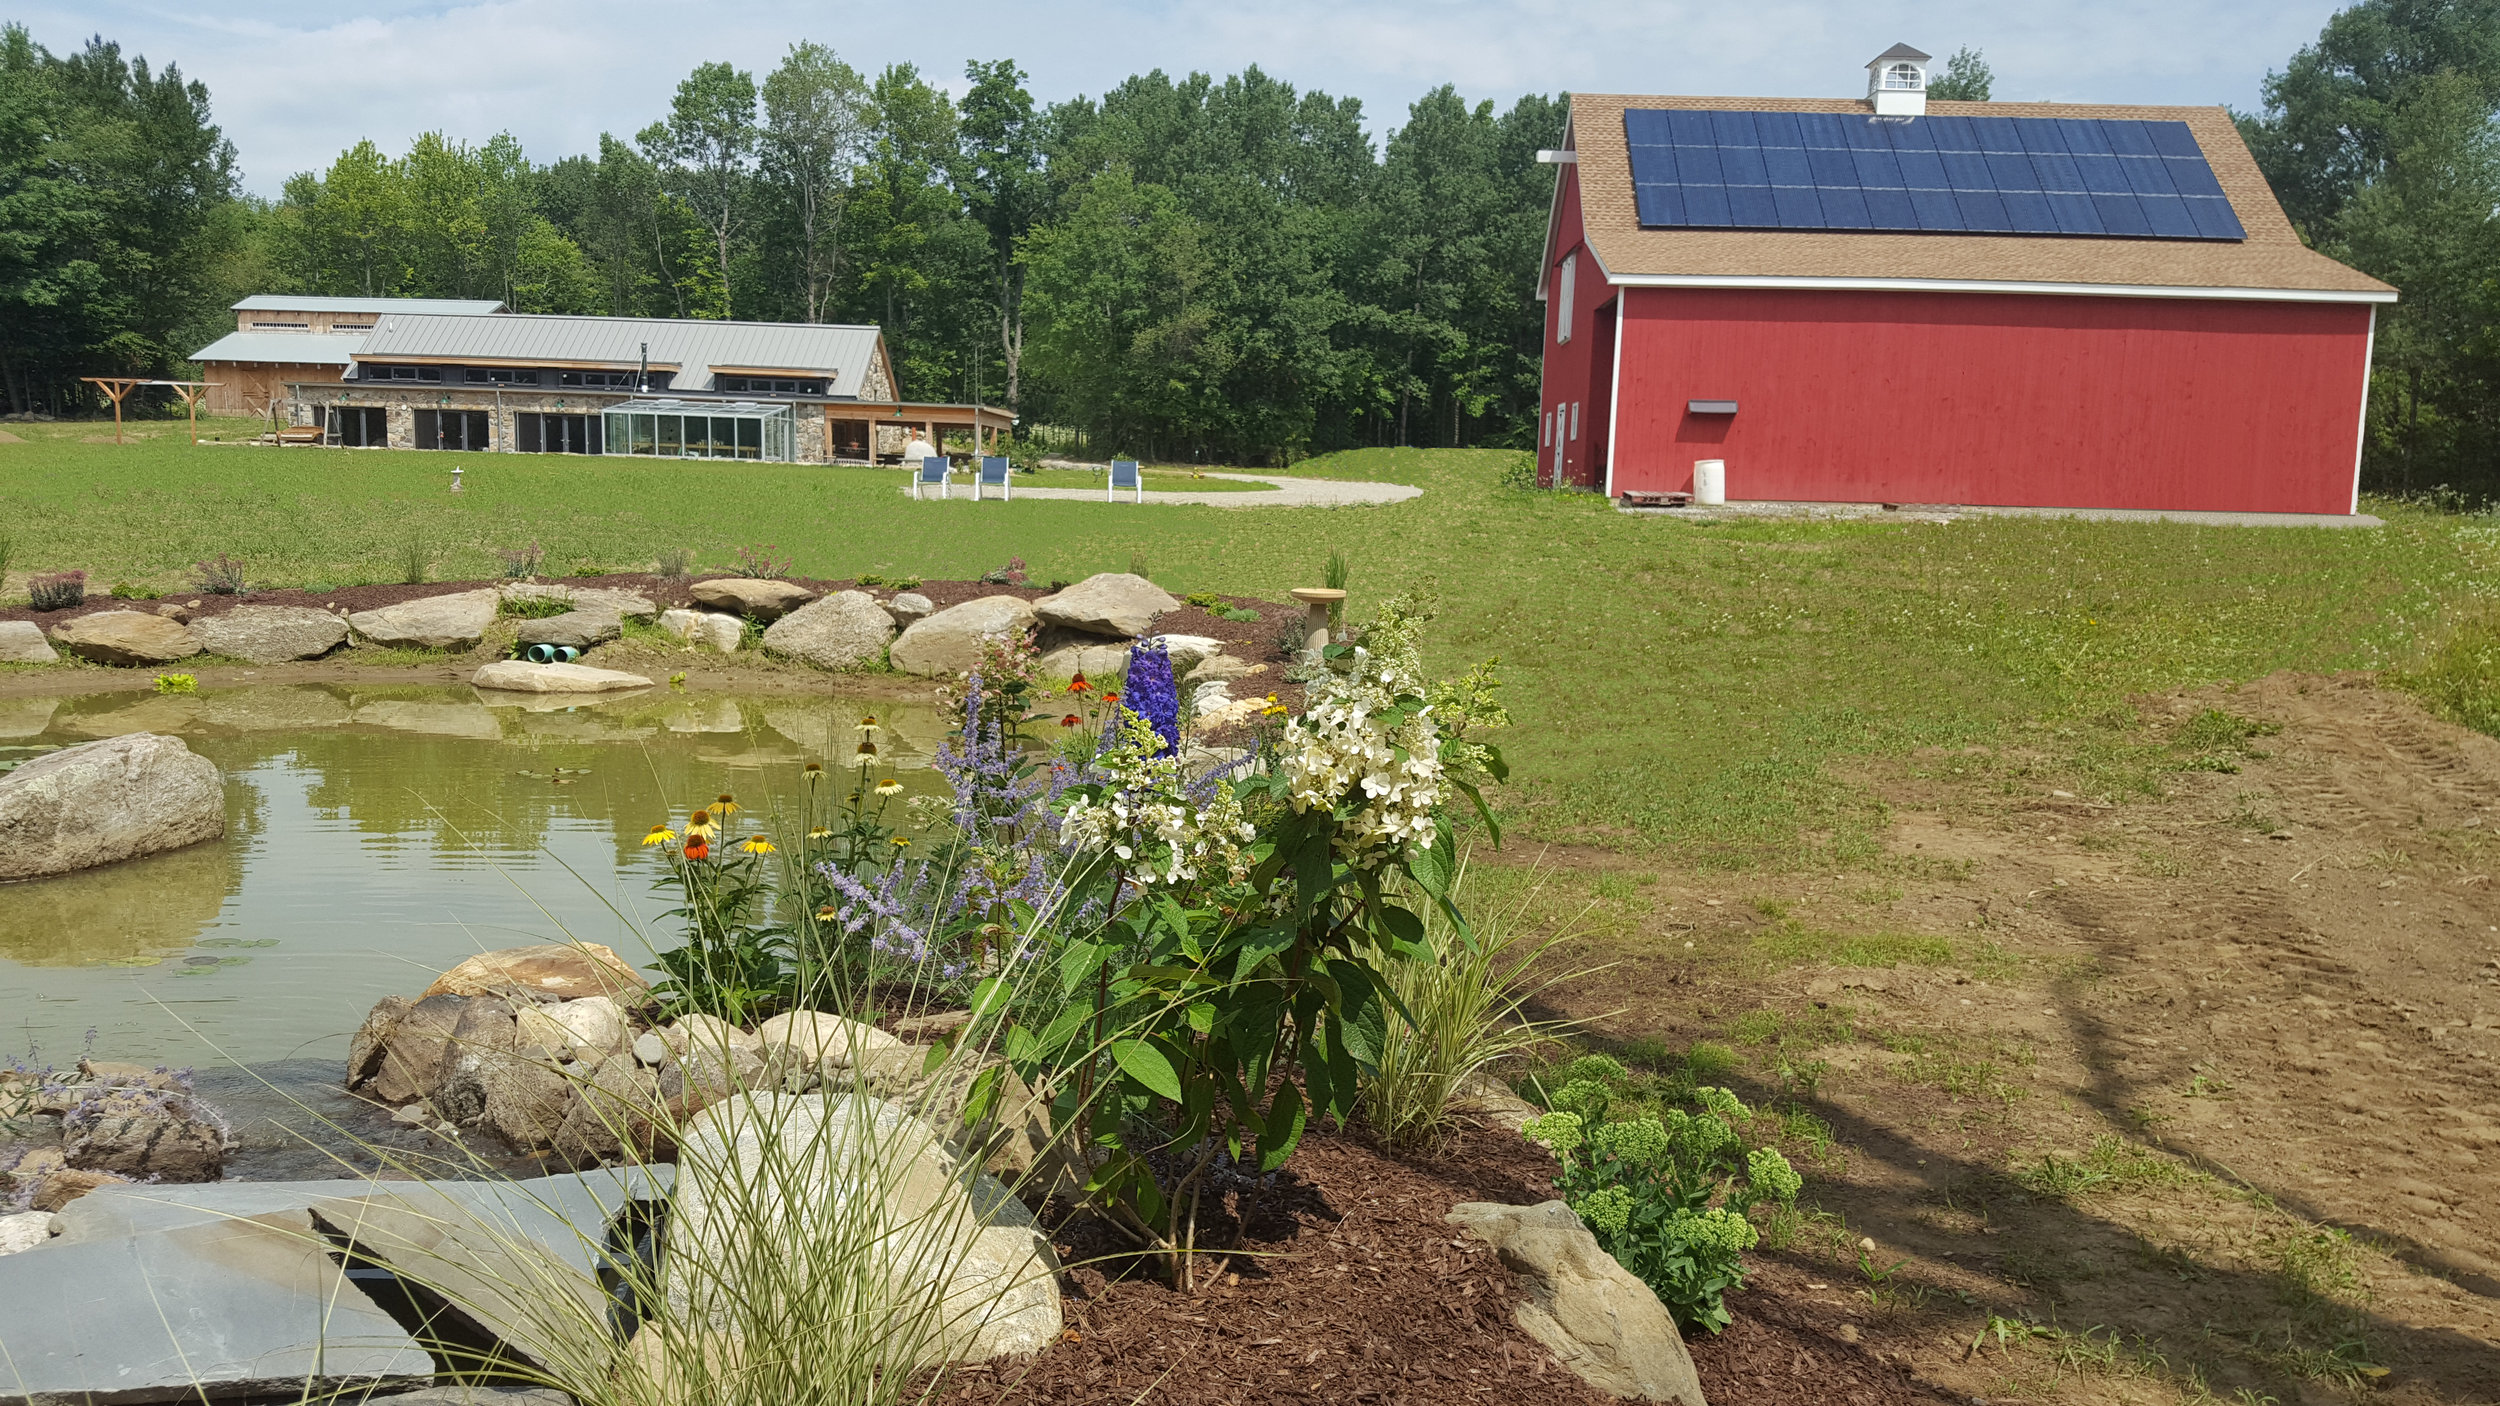 pond with house and solar panels on barn.jpg